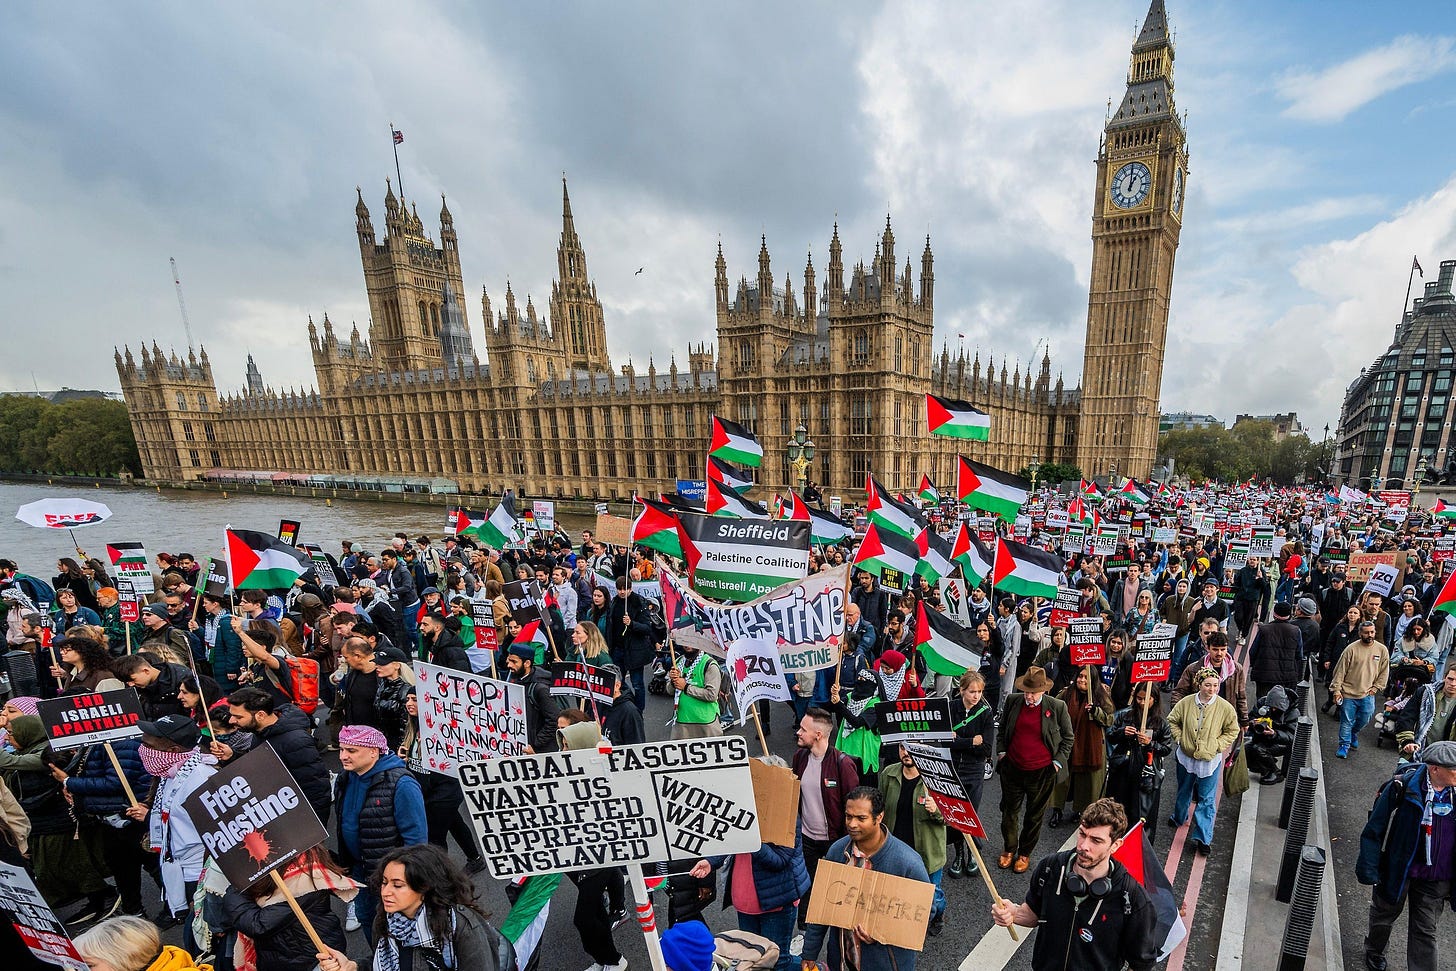 Support heroism' of terrorists pamphlet sold Palestine protest in London